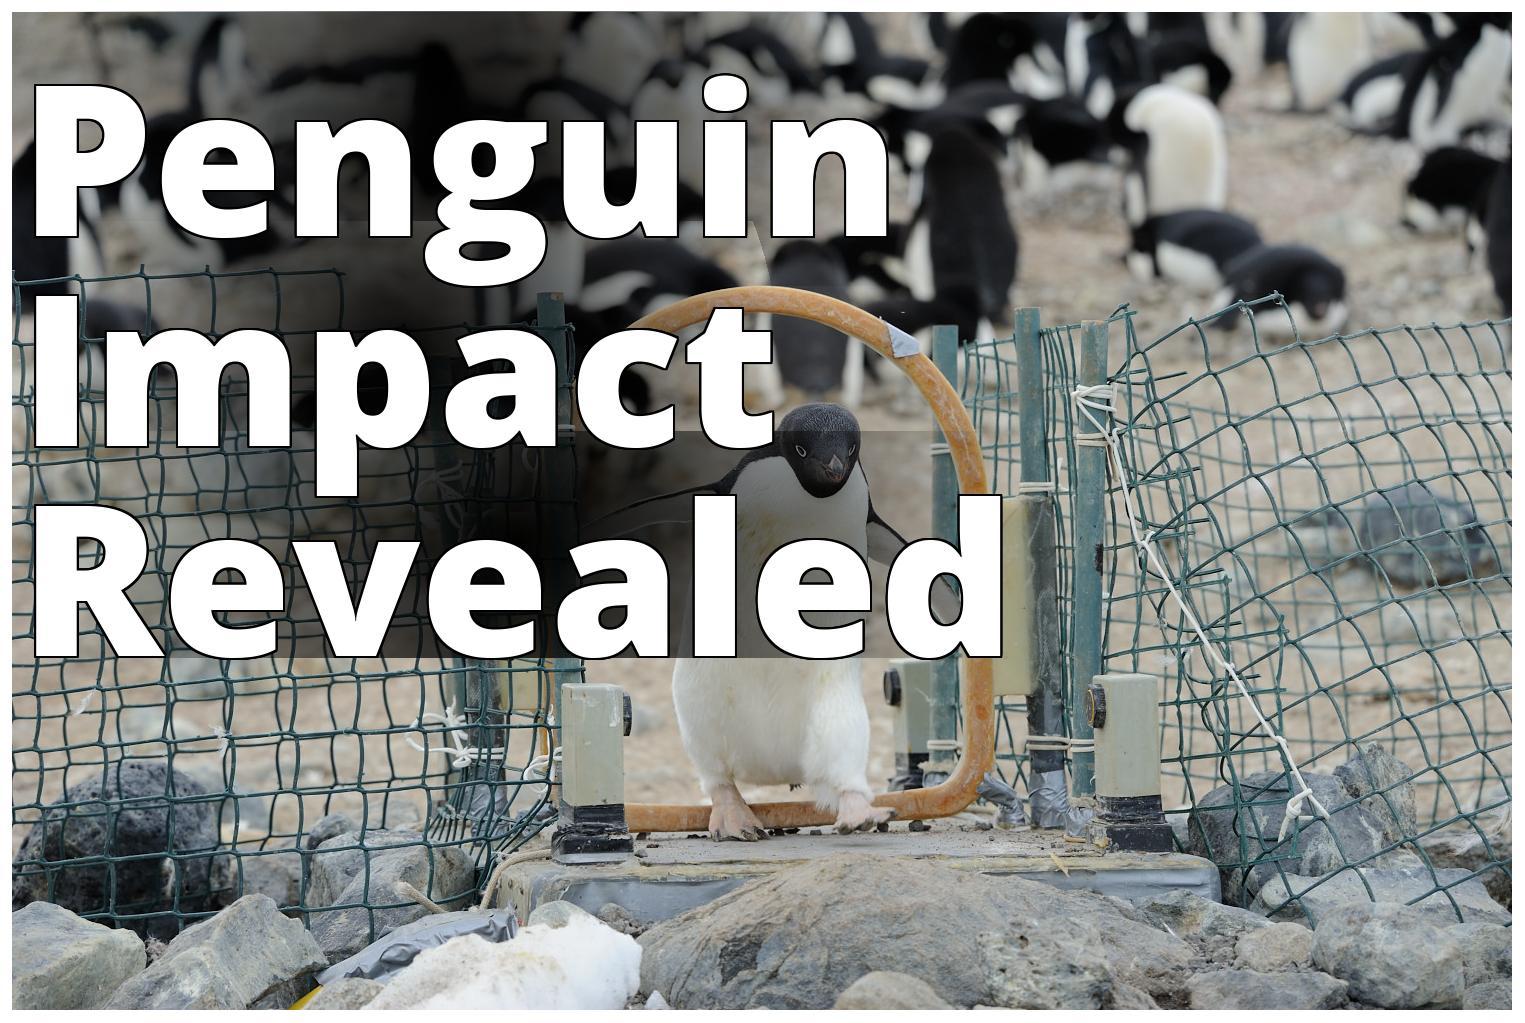 Automated weighbridge for Adélie penguins - journal.pone.0085291.g002 - a penguin is standing on a r